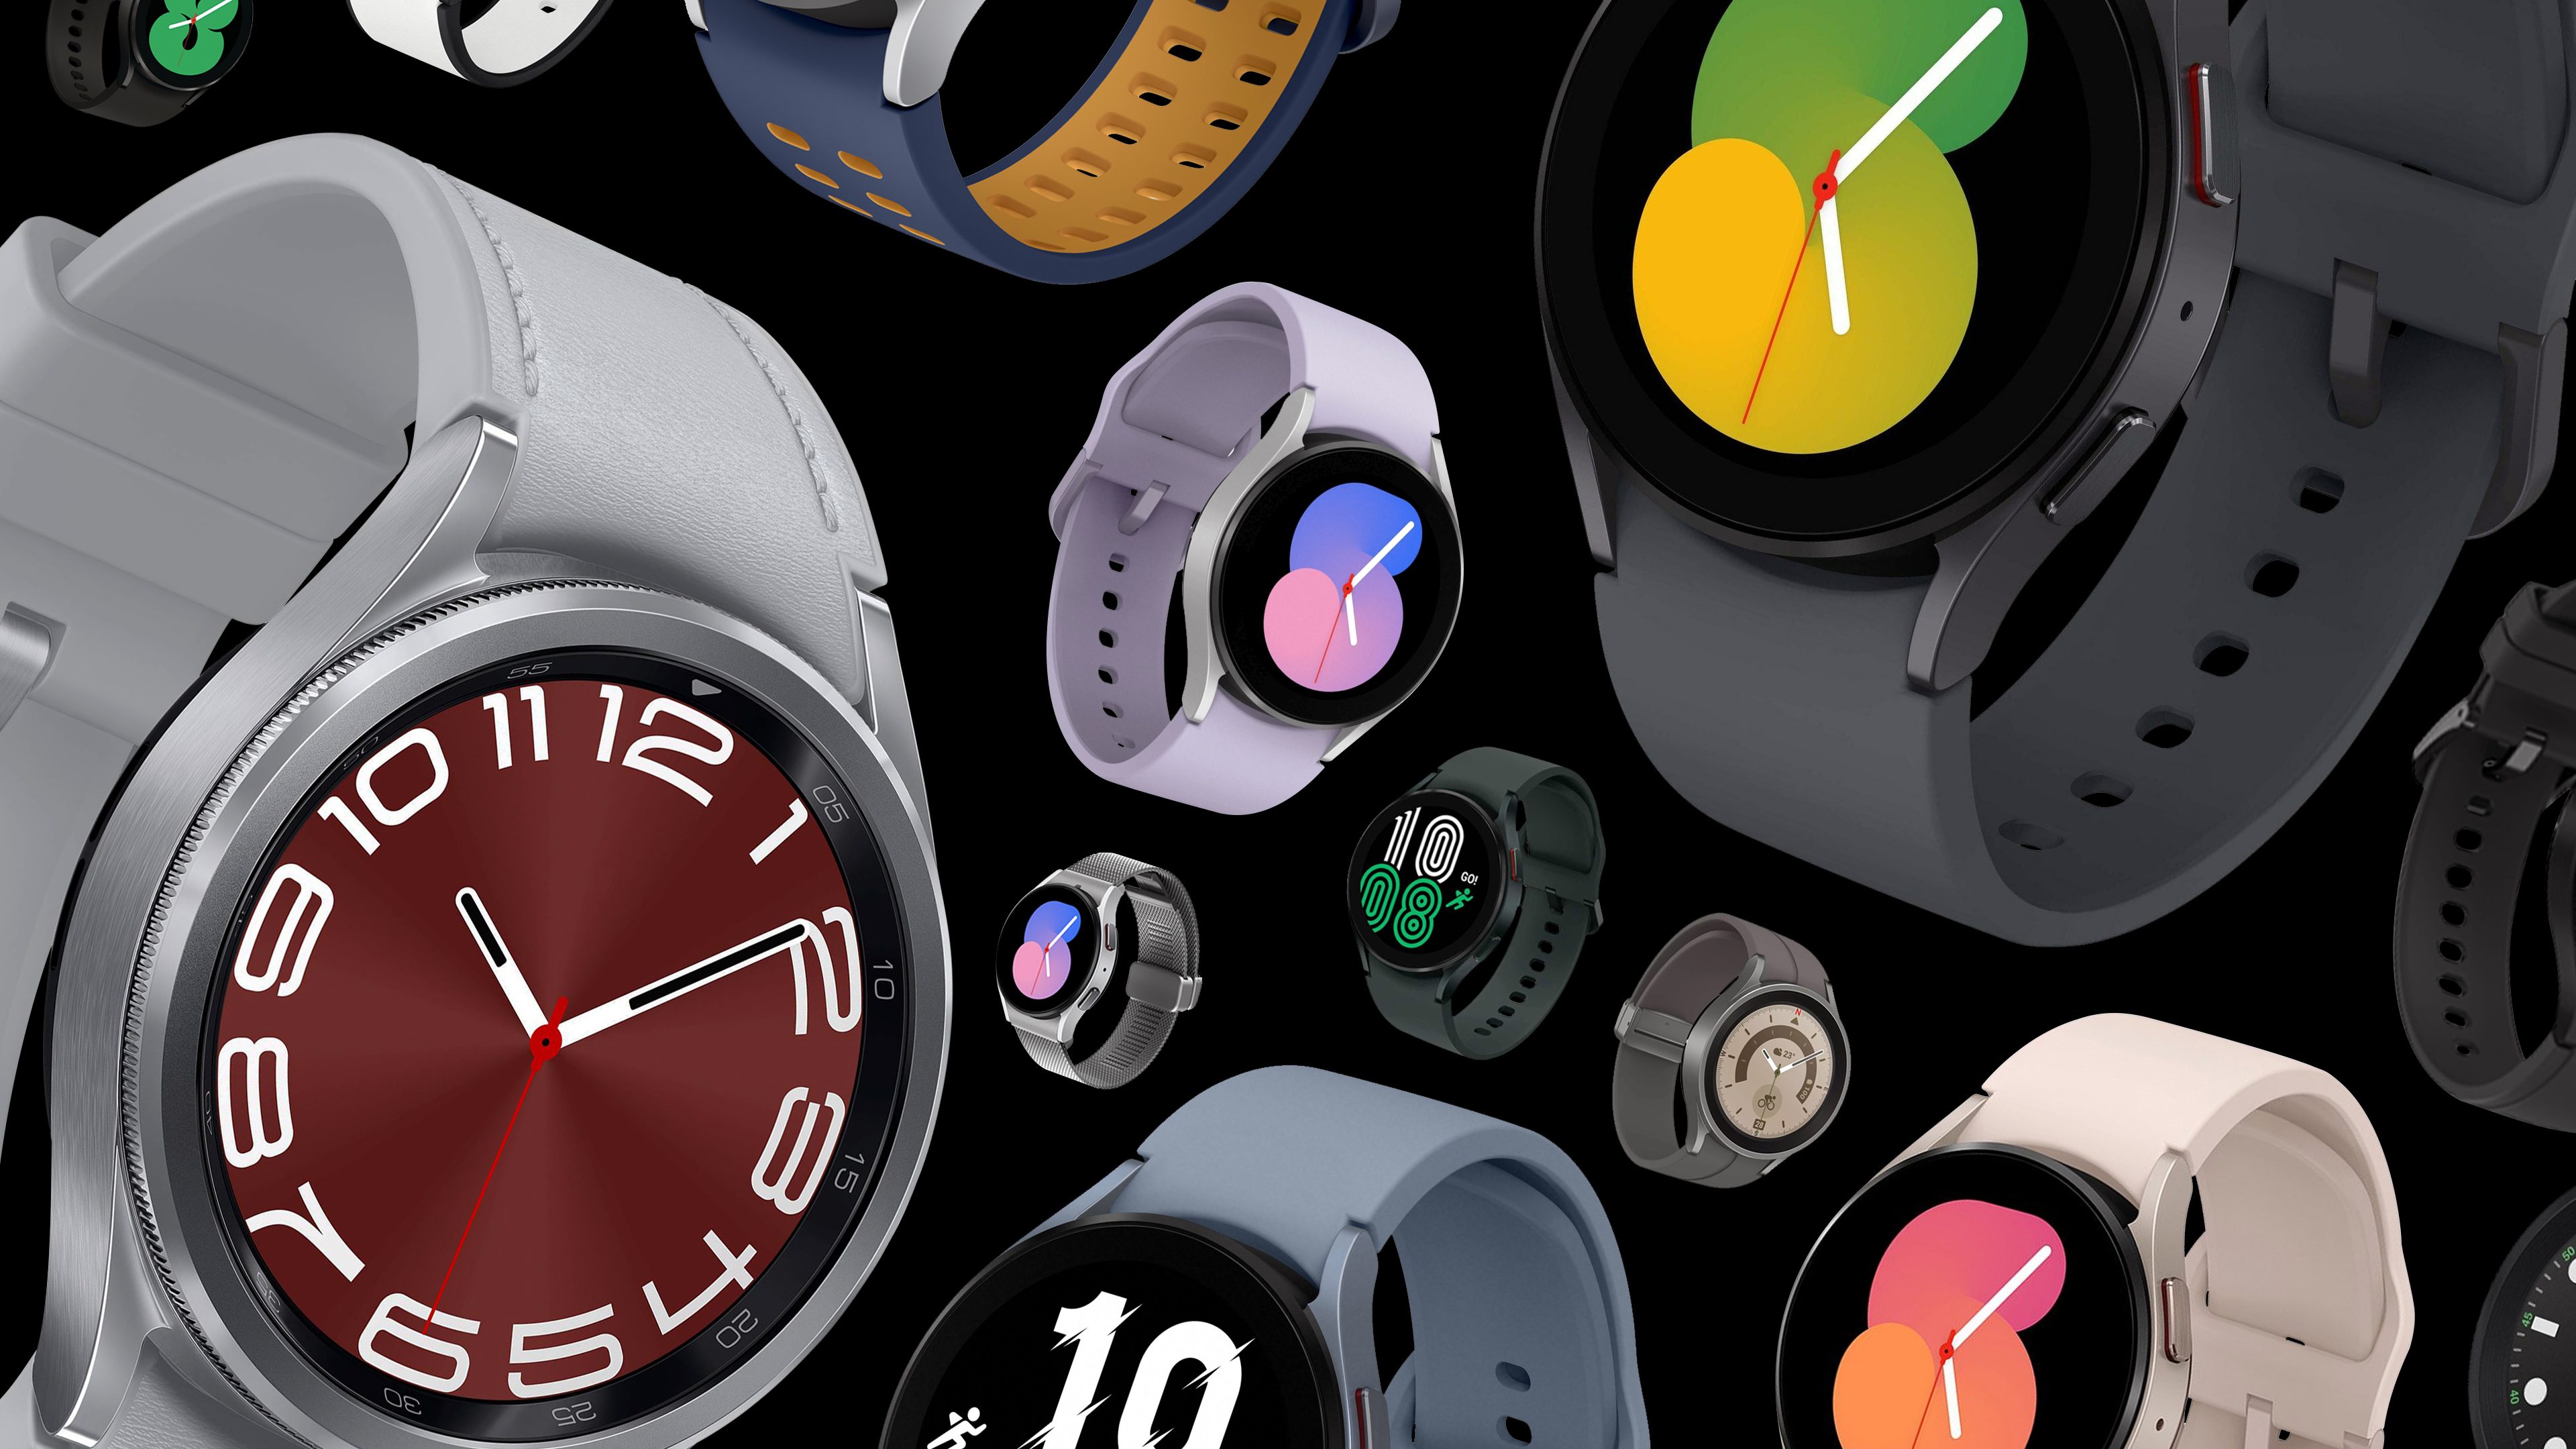 Best Samsung Smartwatches: What Is the Right Galaxy Watch for You?